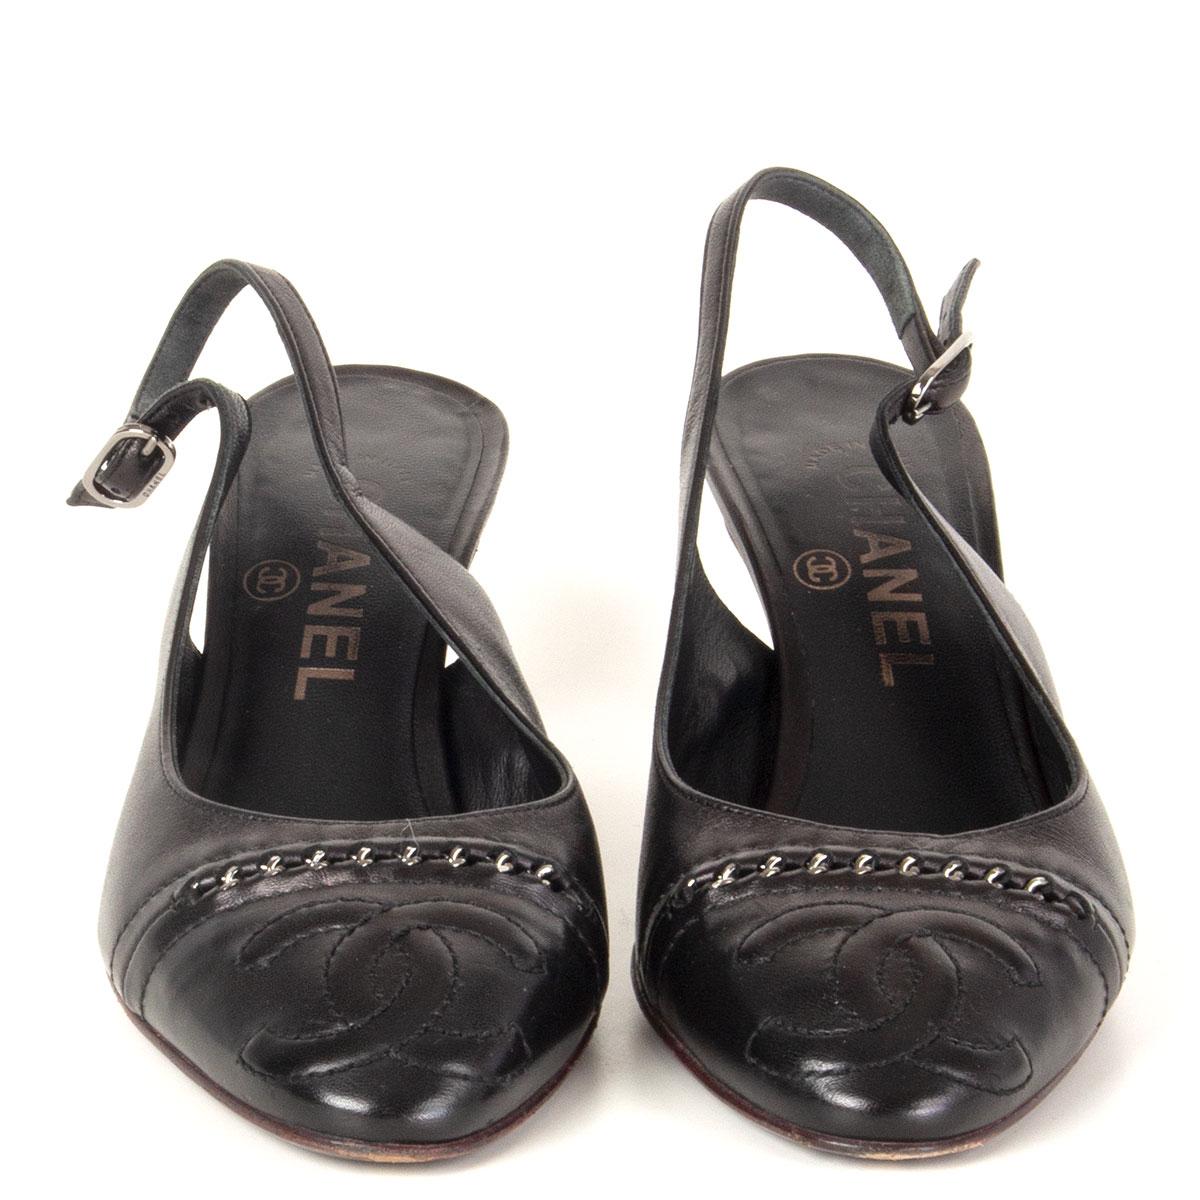 authentic Chanel slingbacks in black calfskin with silver-tone chain detail and CC stitching on the tip. Have been worn and are in excellent condition. 

Imprinted Size 37
Shoe Size 37
Inside Sole 24cm (9.4in)
Width 7.5cm (2.9in)
Heel 7cm (2.7in)
